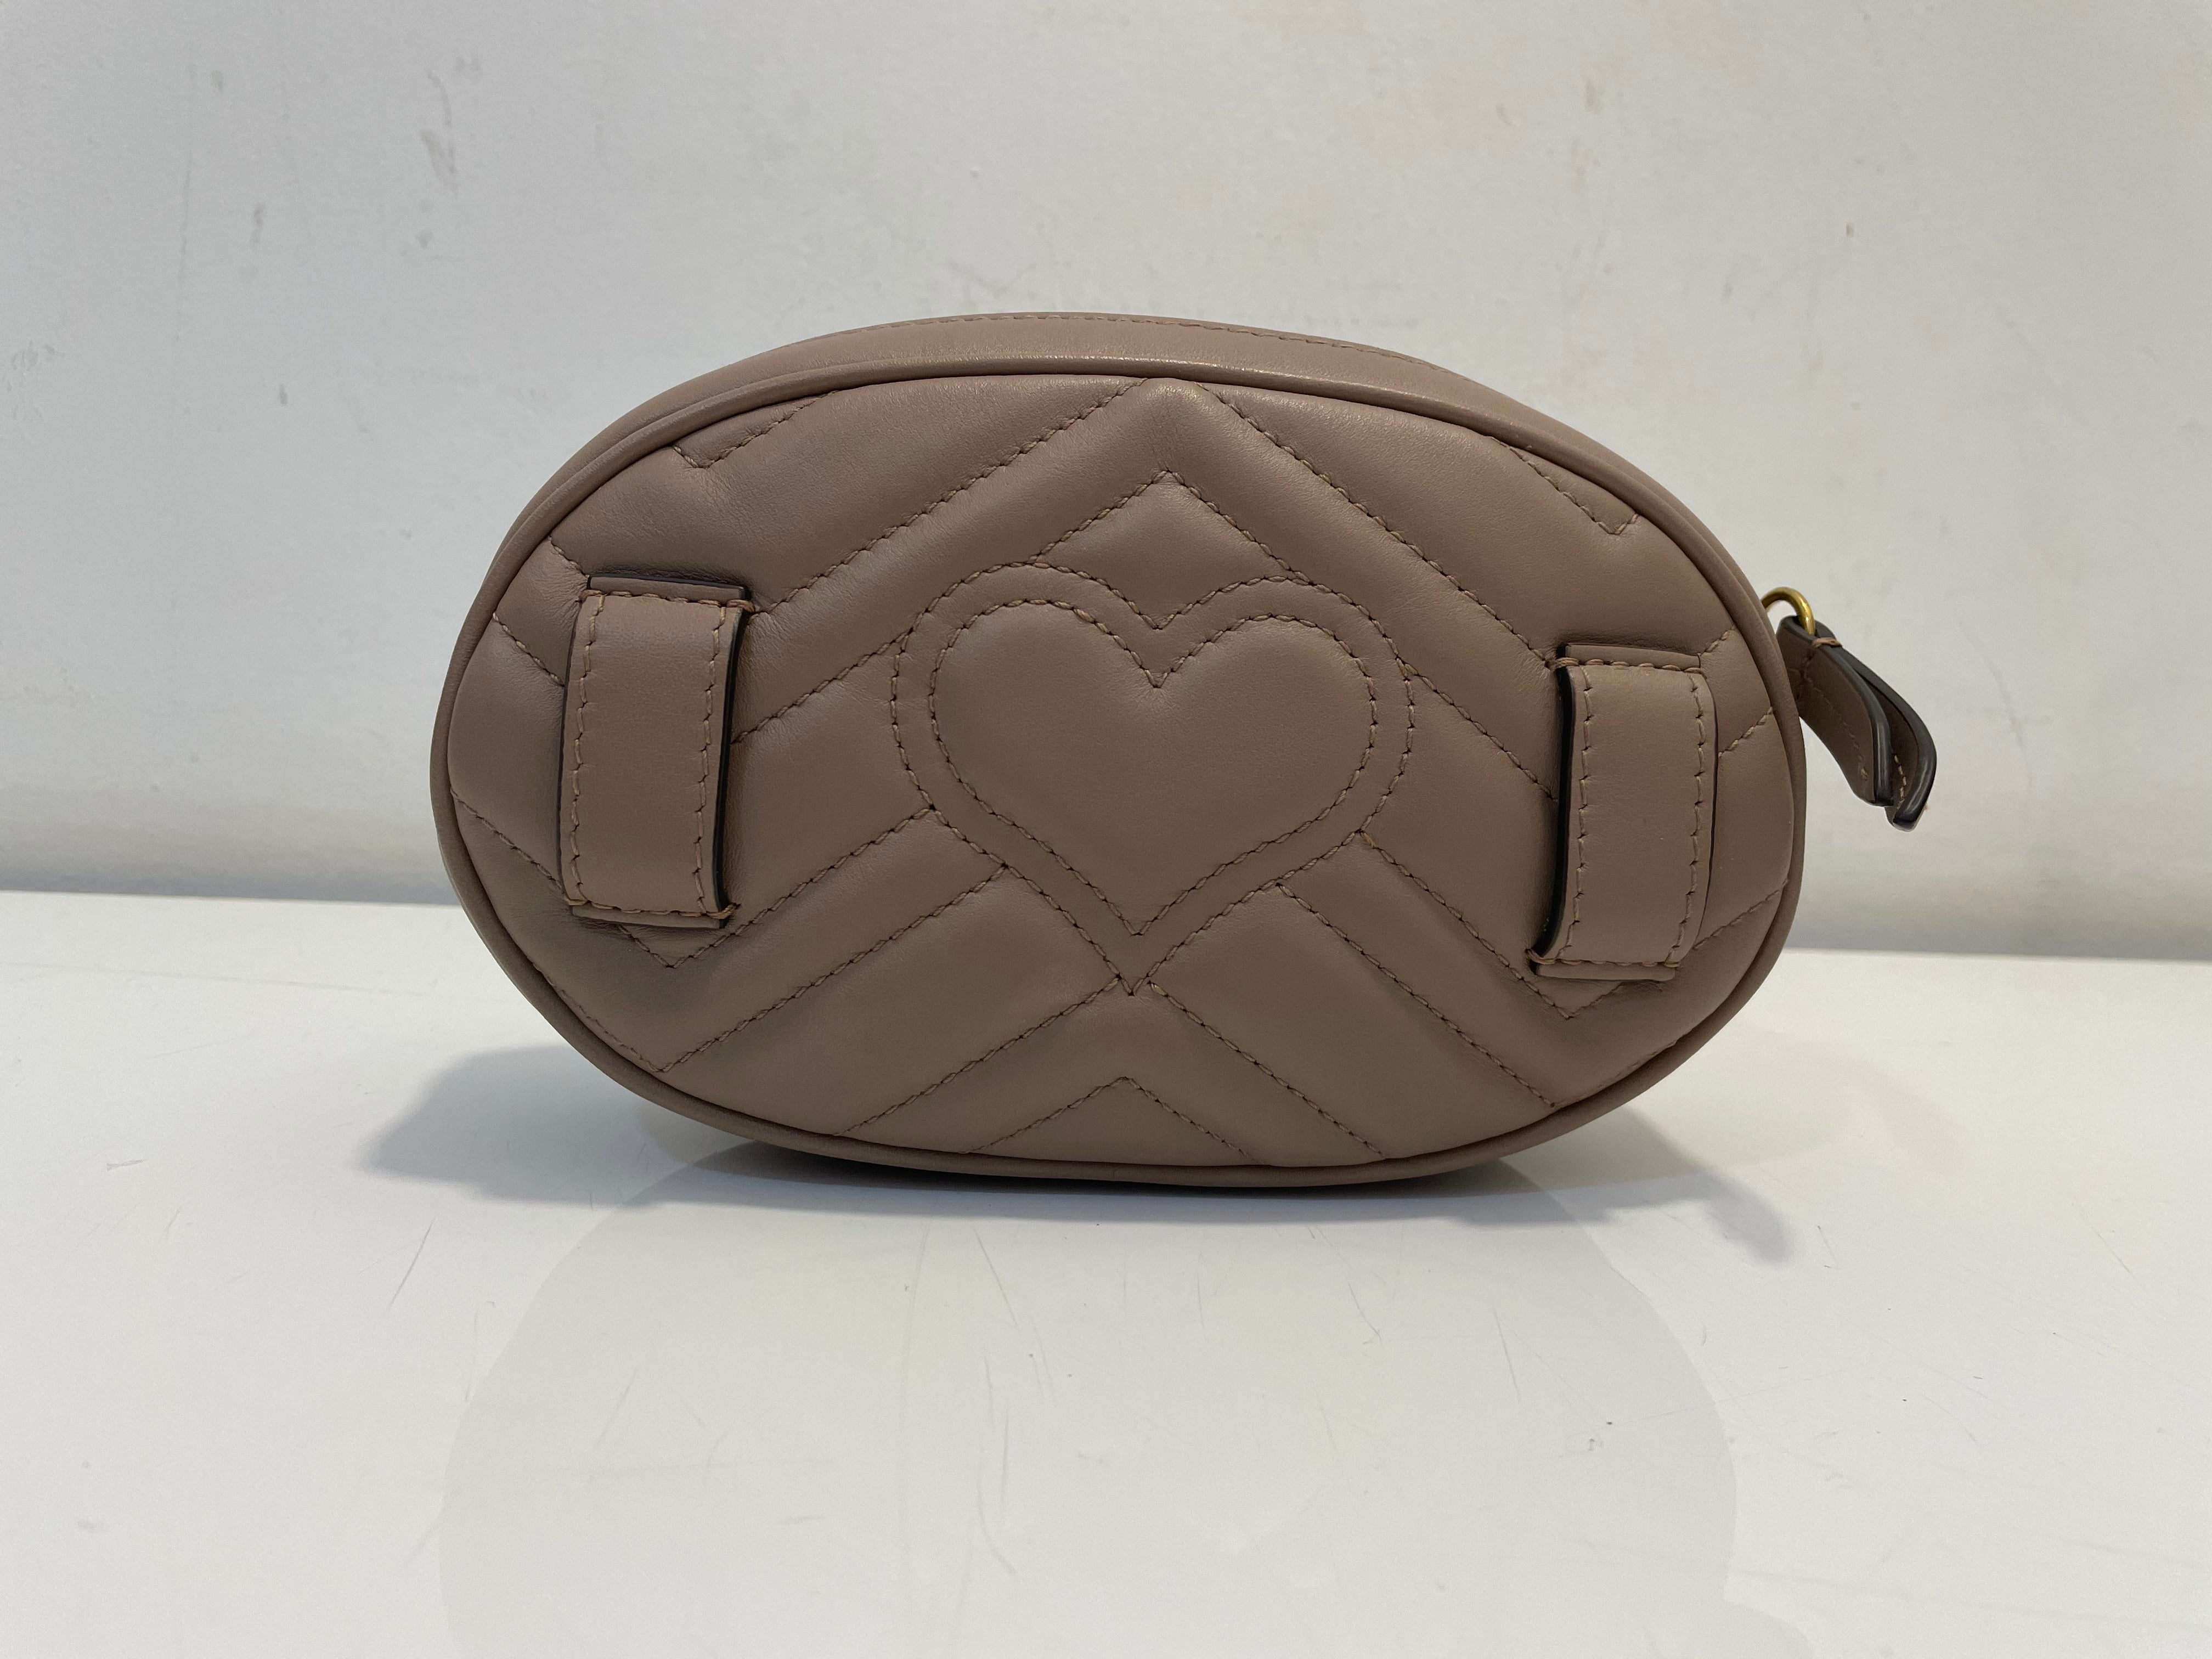 Gucci Beige GG Marmont Quilted Small Belt Bag